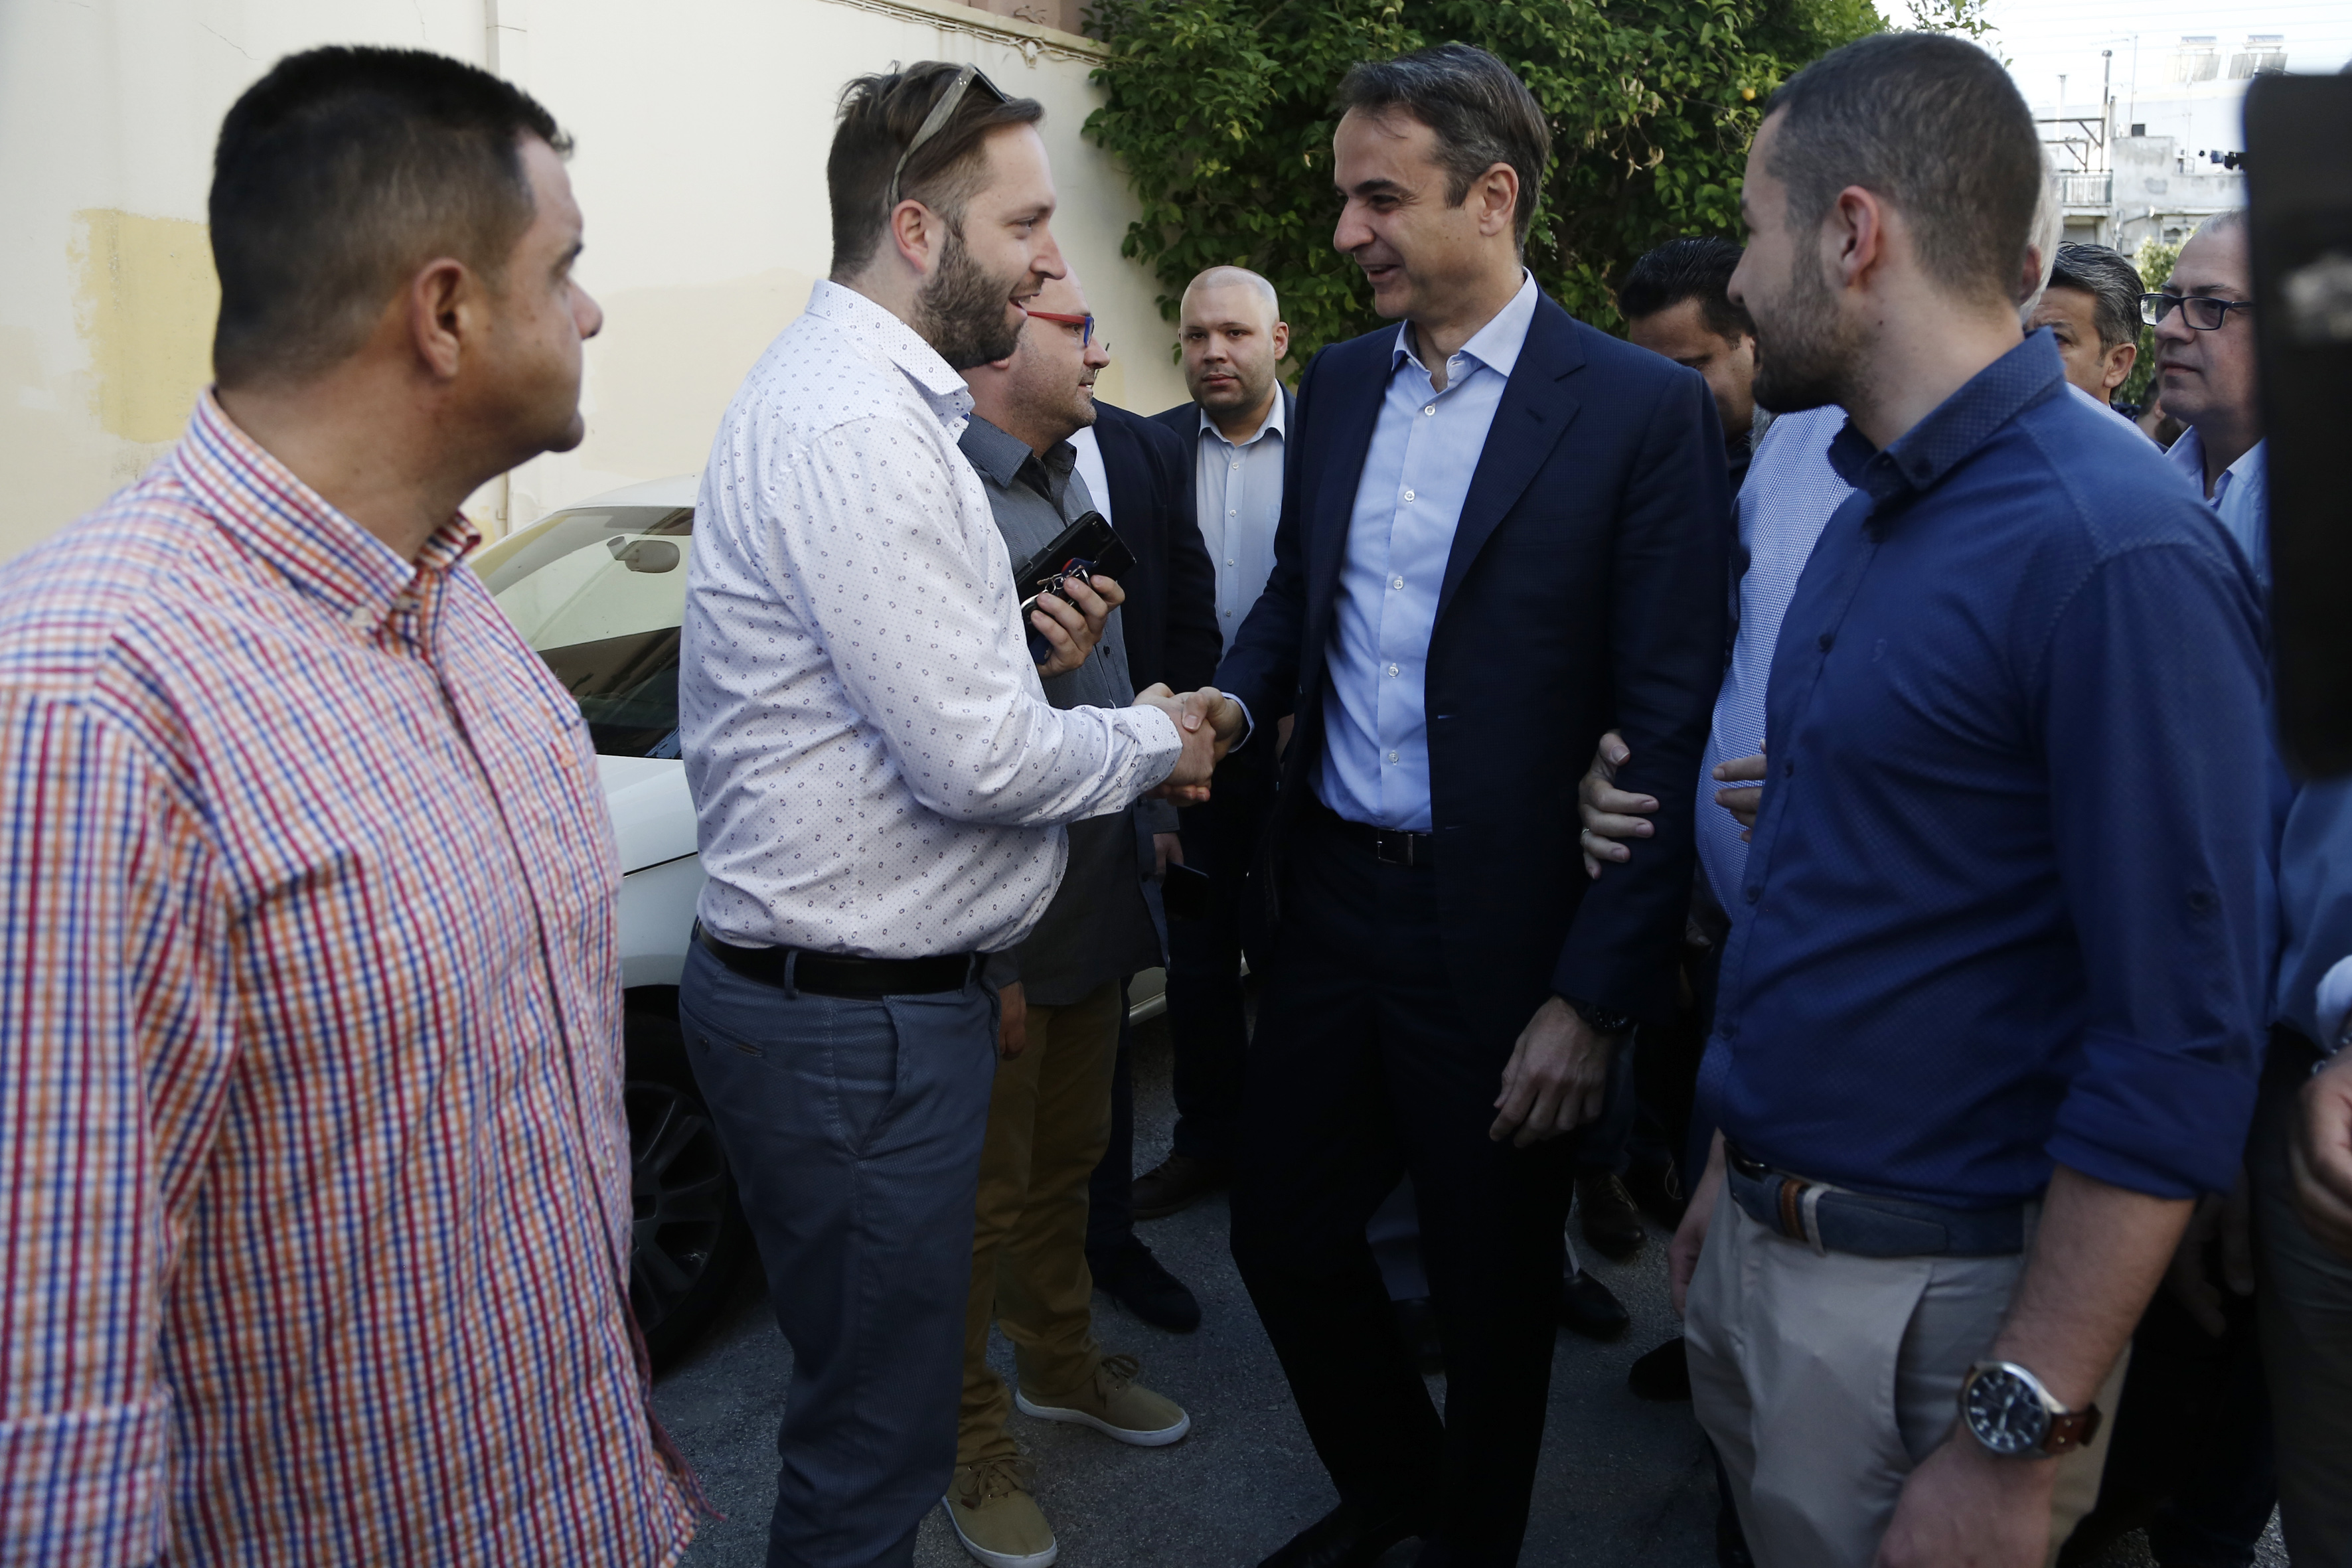 Mitsotakis wants Greeks abroad to vote, calls for dividing up largest electoral district